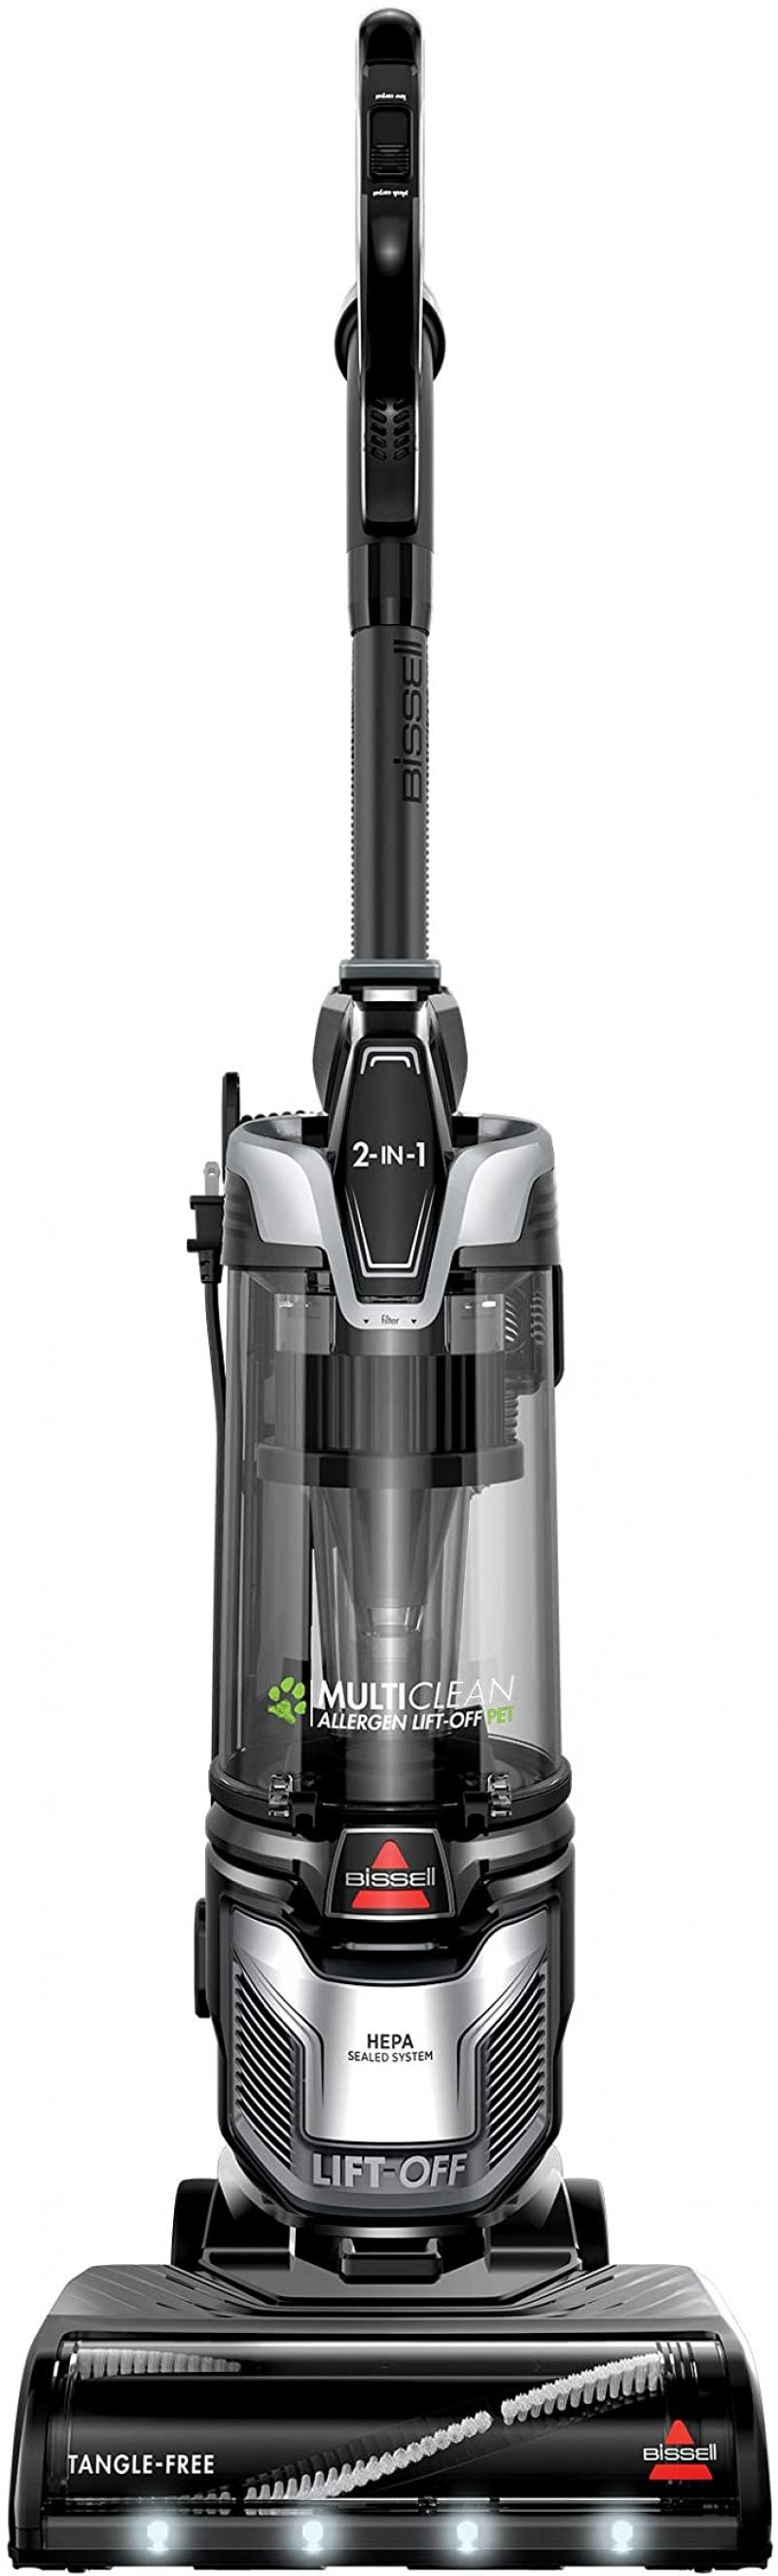 ihocon: BISSELL MultiClean Allergen Lift-OFF Pet Slim Upright Vacuum with HEPA Filter Sealed System